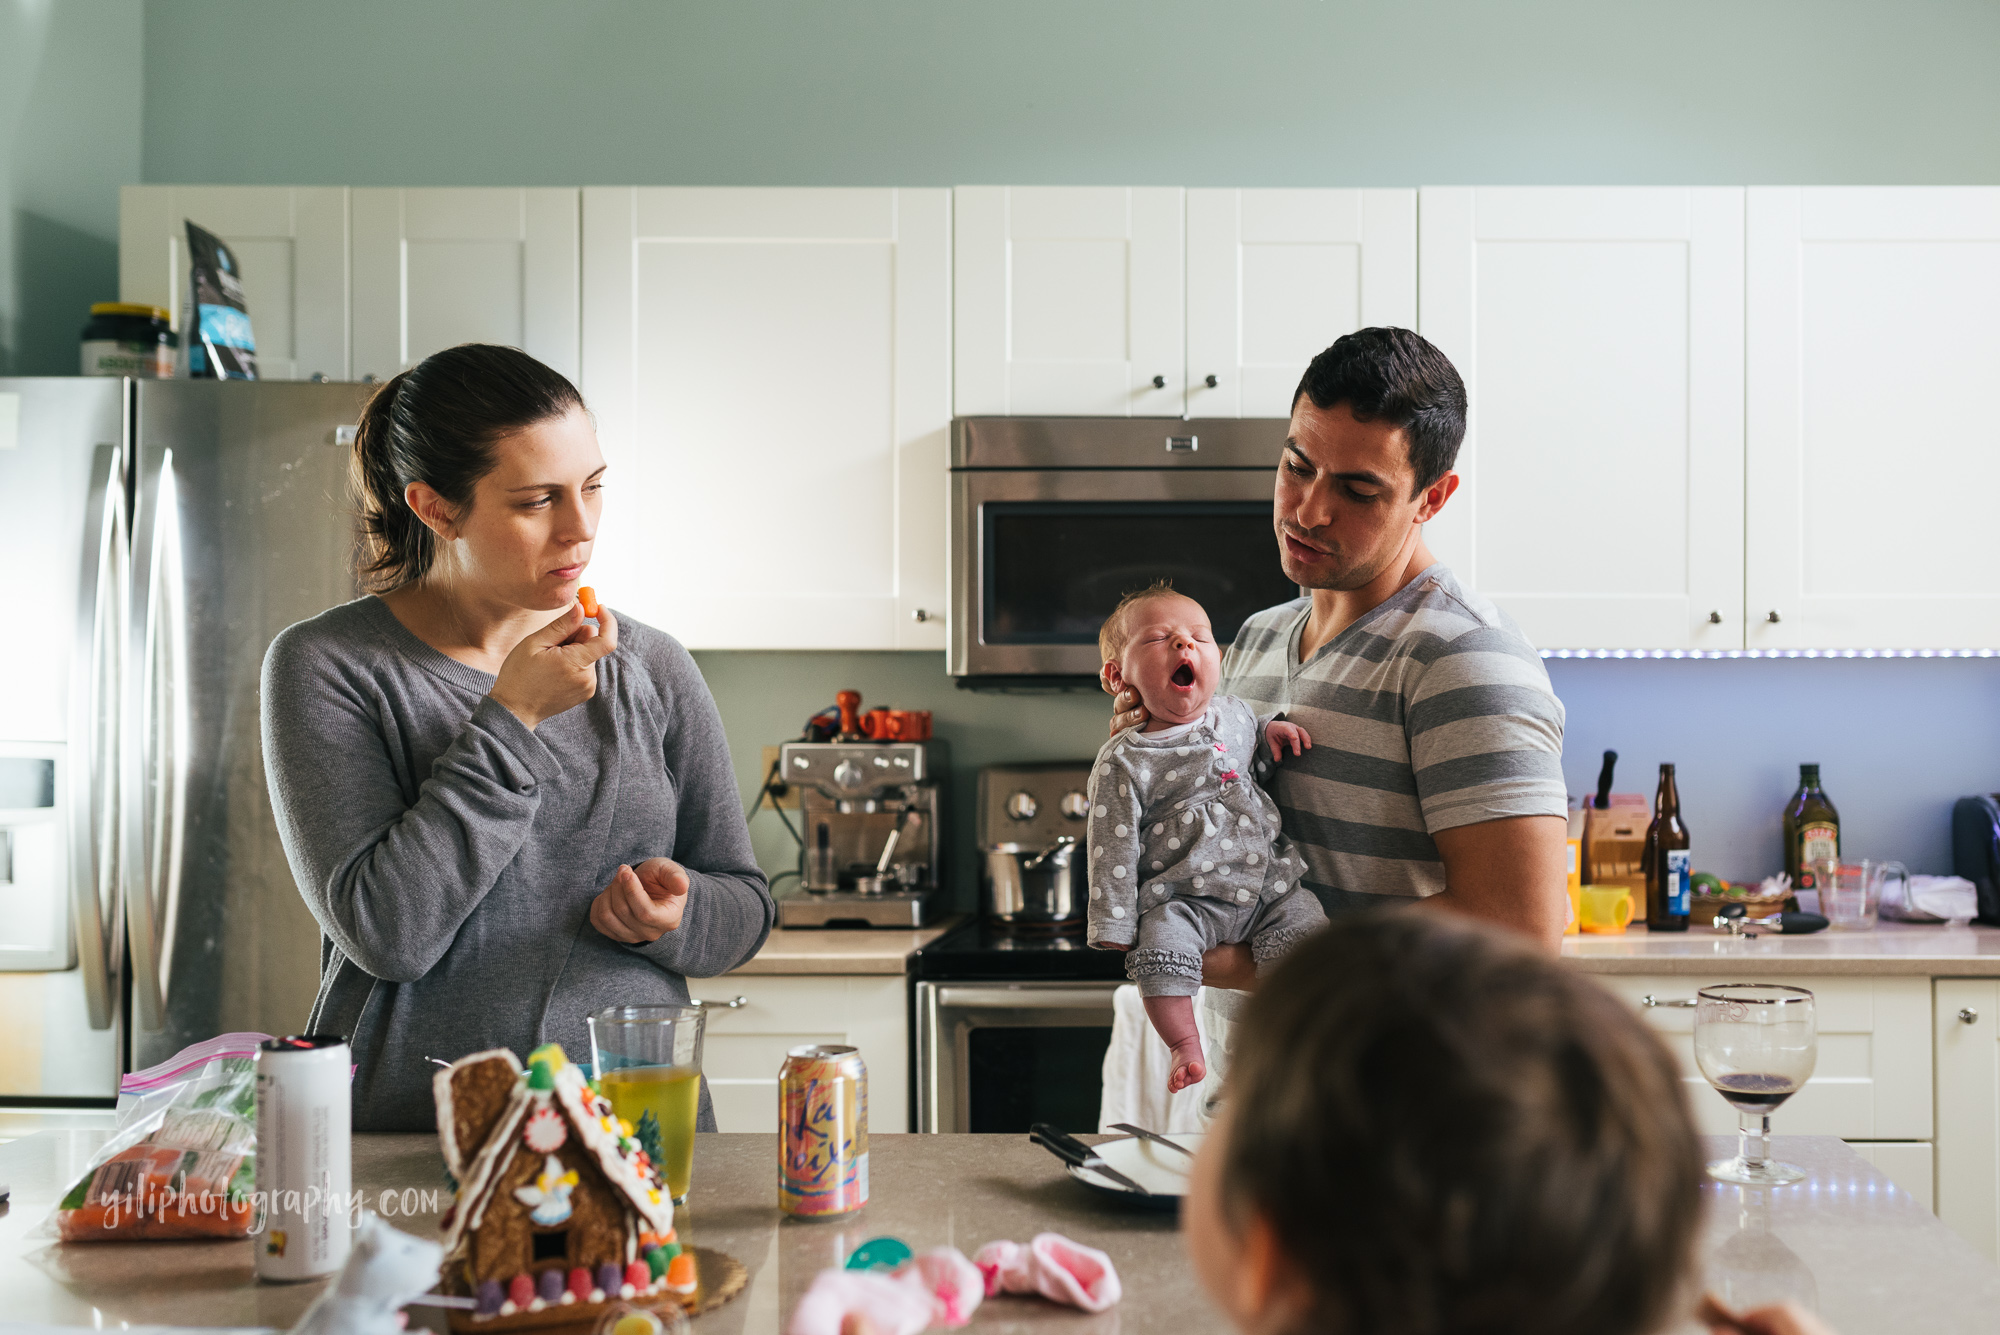 seattle family eating together in kitchen with newborn baby